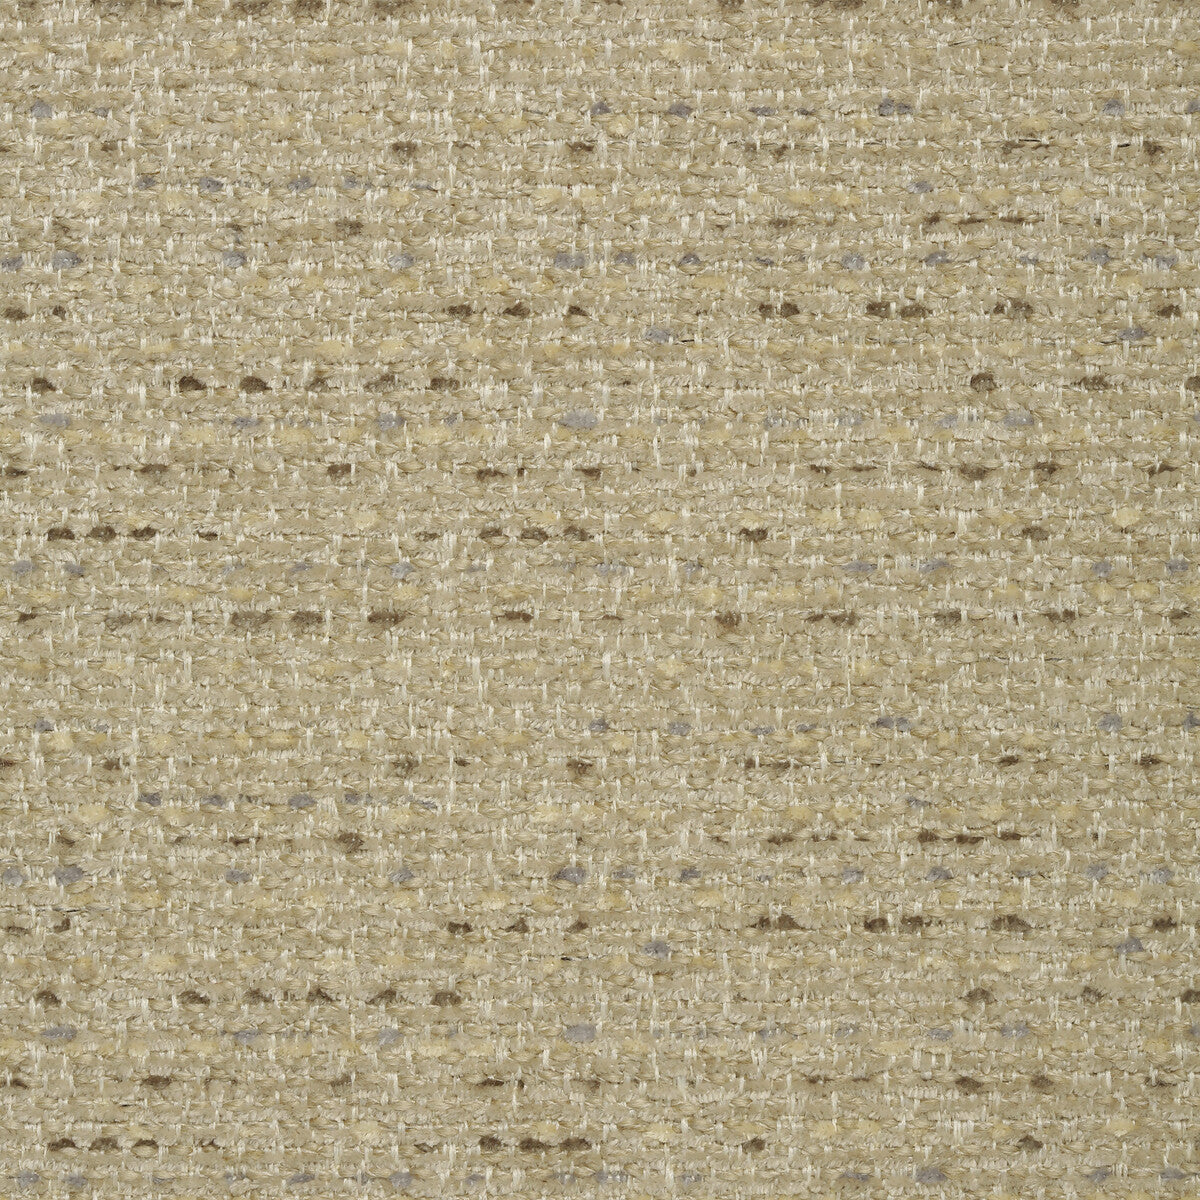 Kravet Smart fabric in 35117-16 color - pattern 35117.16.0 - by Kravet Smart in the Performance Crypton Home collection